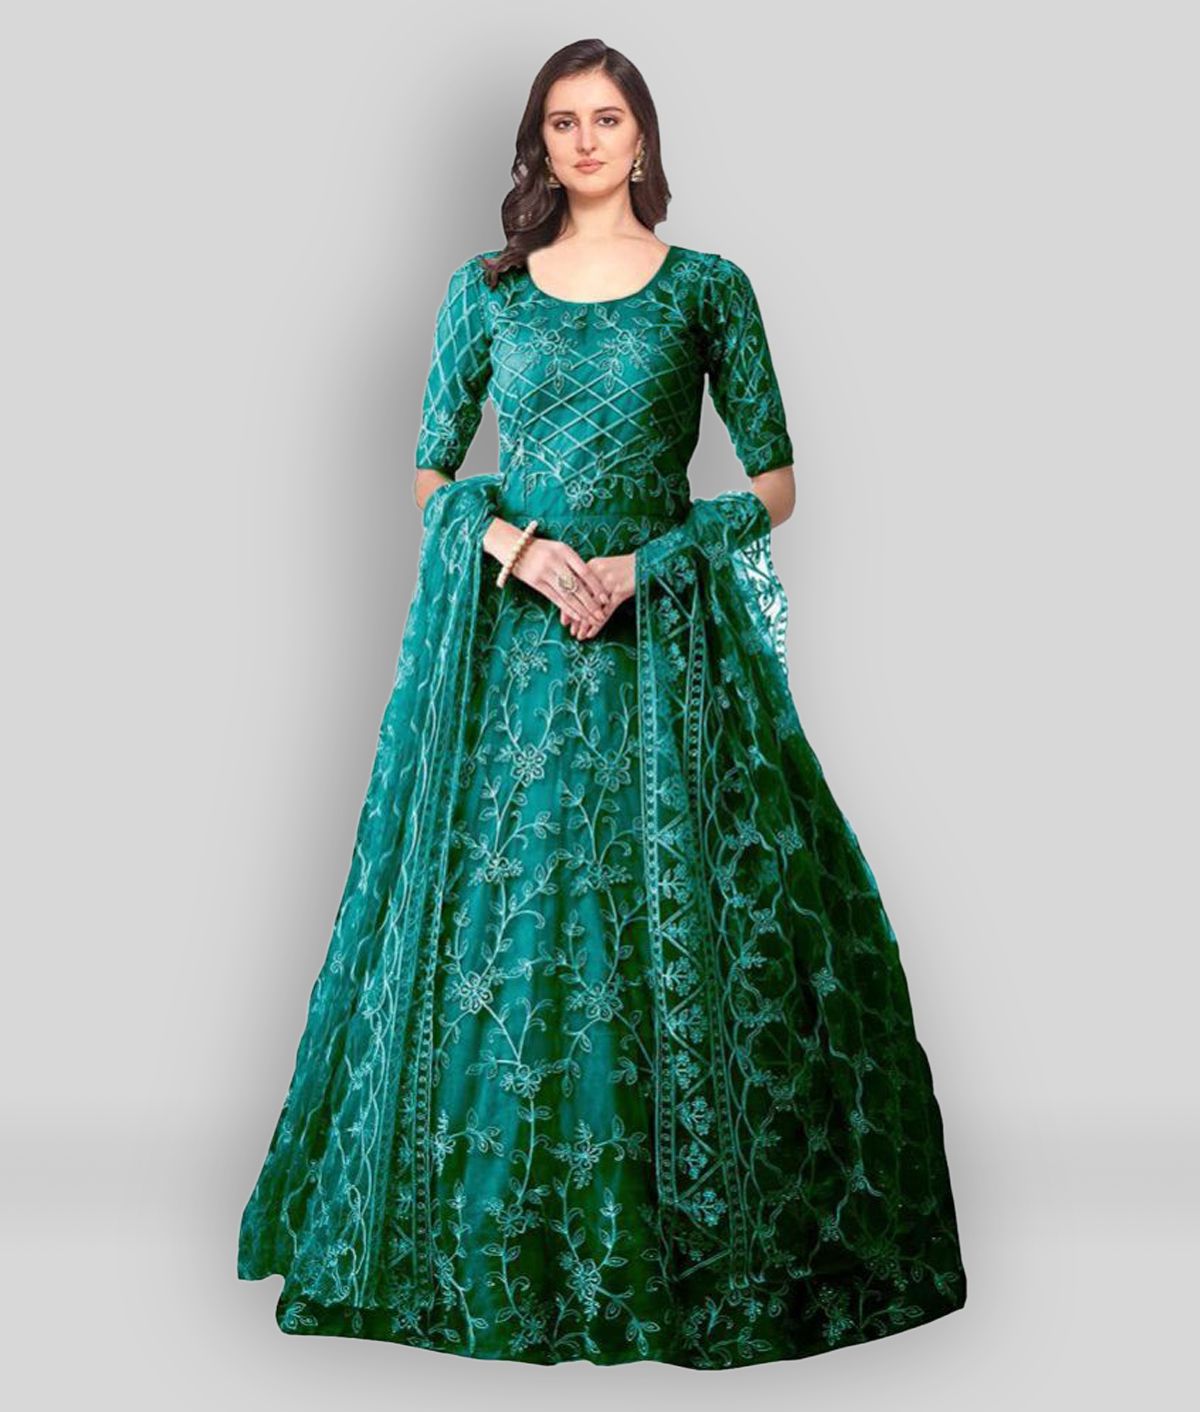     			Estela - Green Anarkali Cotton Women's Stitched Ethnic Gown ( Pack of 1 )